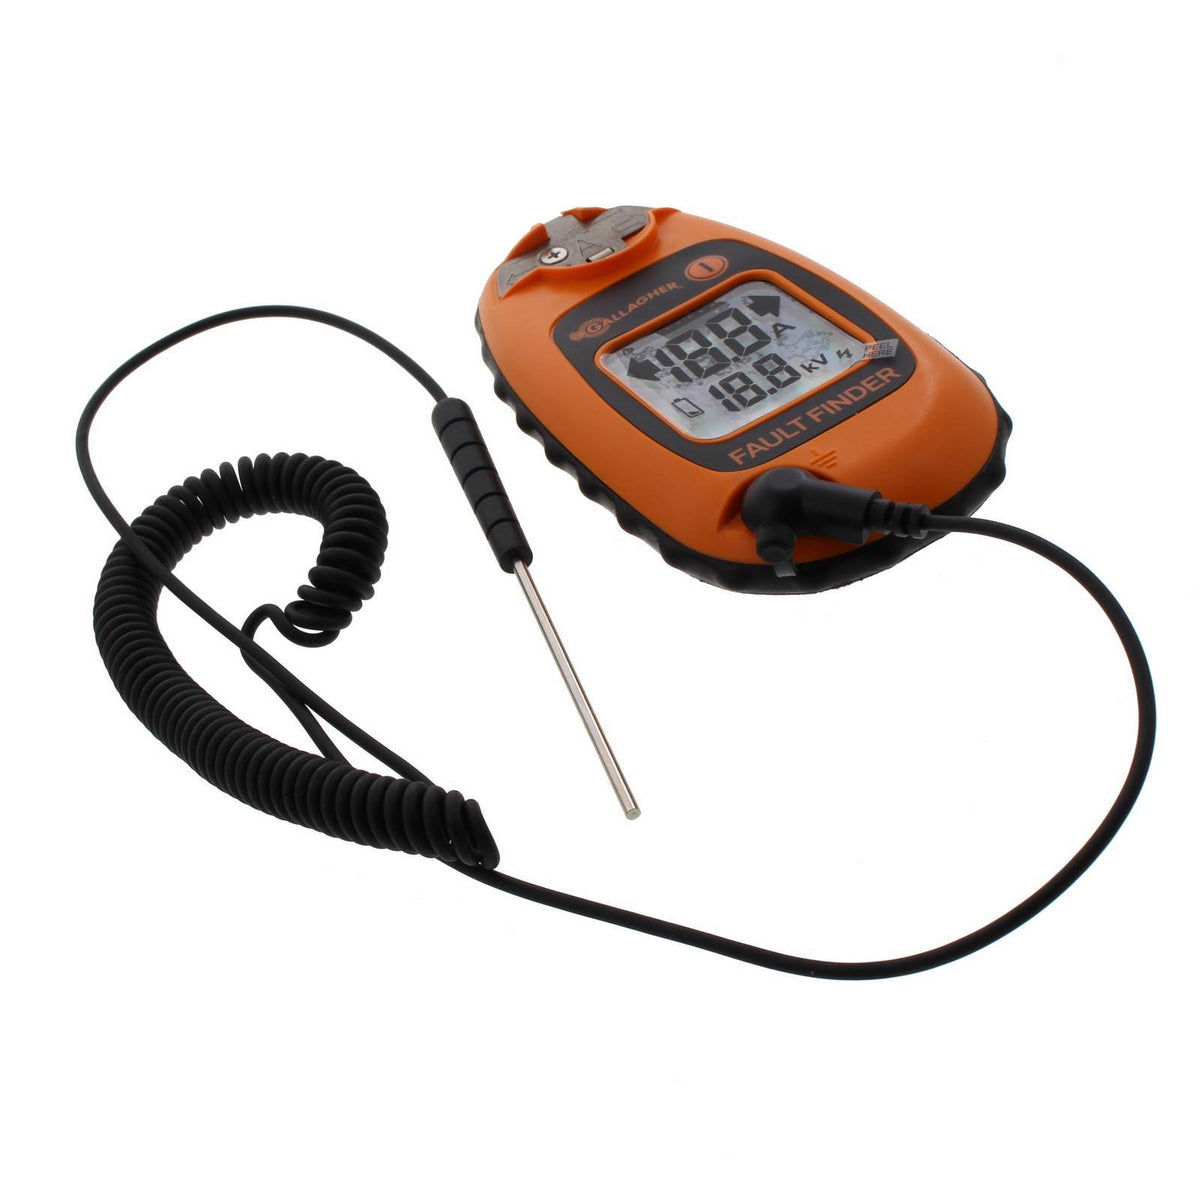 Gallagher Fence Tester, Identify & Locate Electric Fence Faults, Tough  Water & Impact Resistant Pocket Size Digital Reader